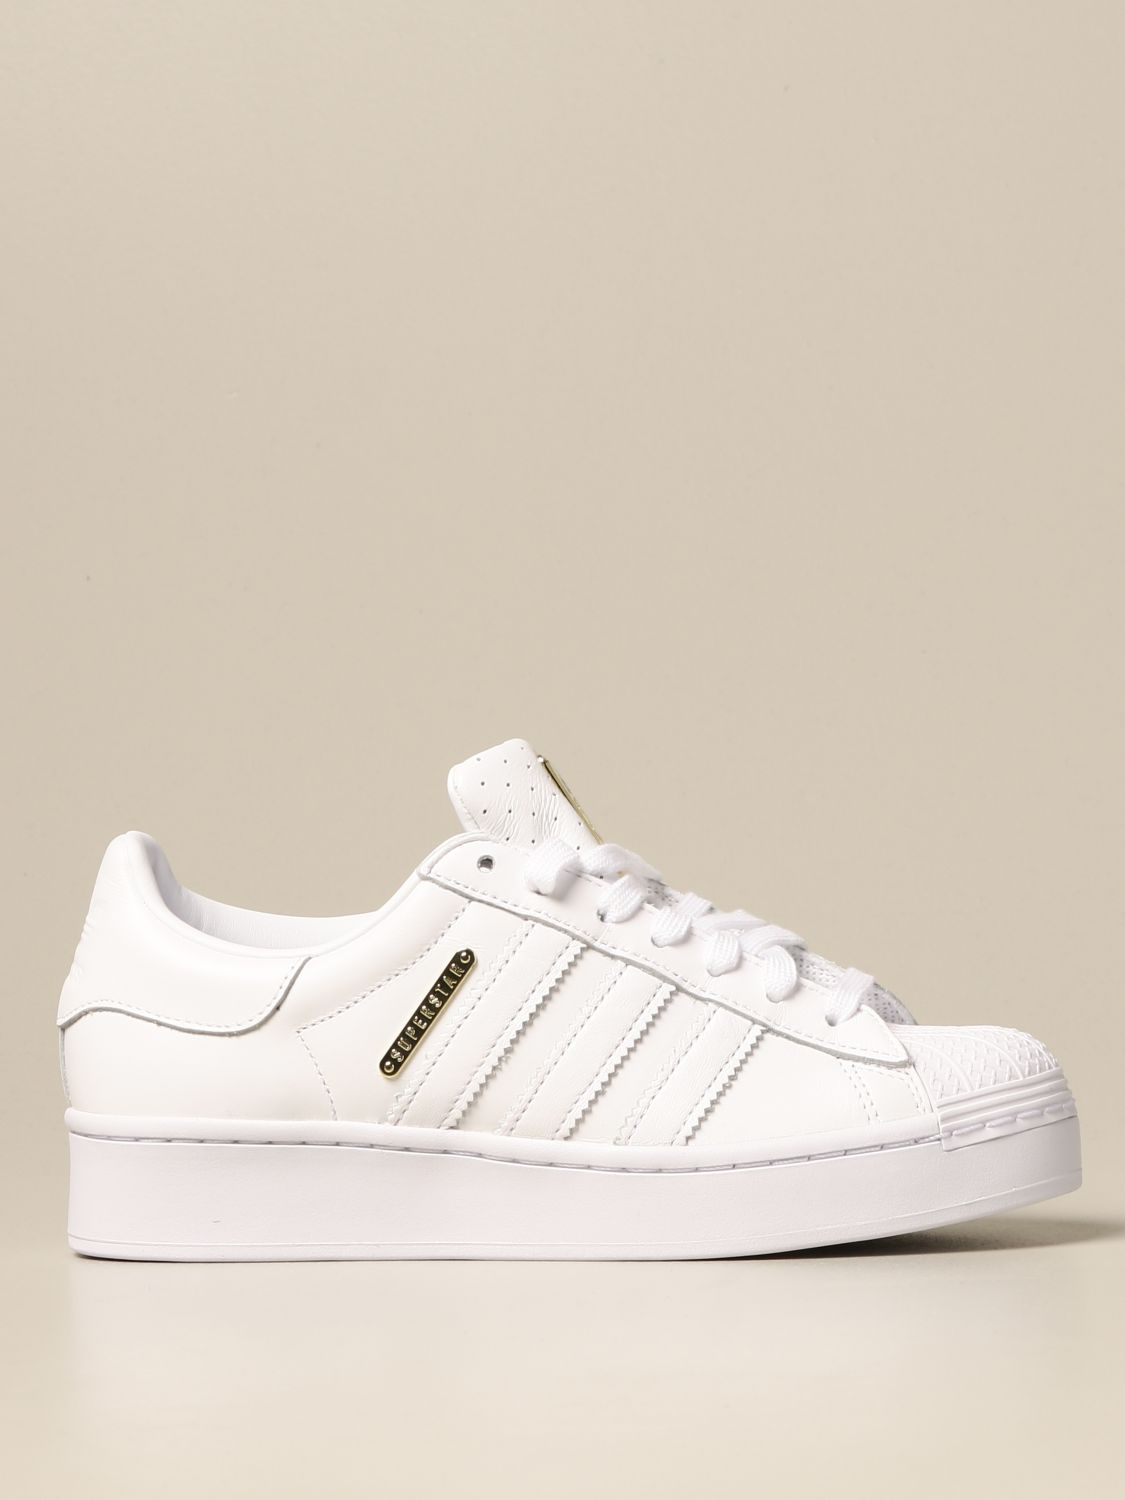 adidas superstar bold leather sneakers